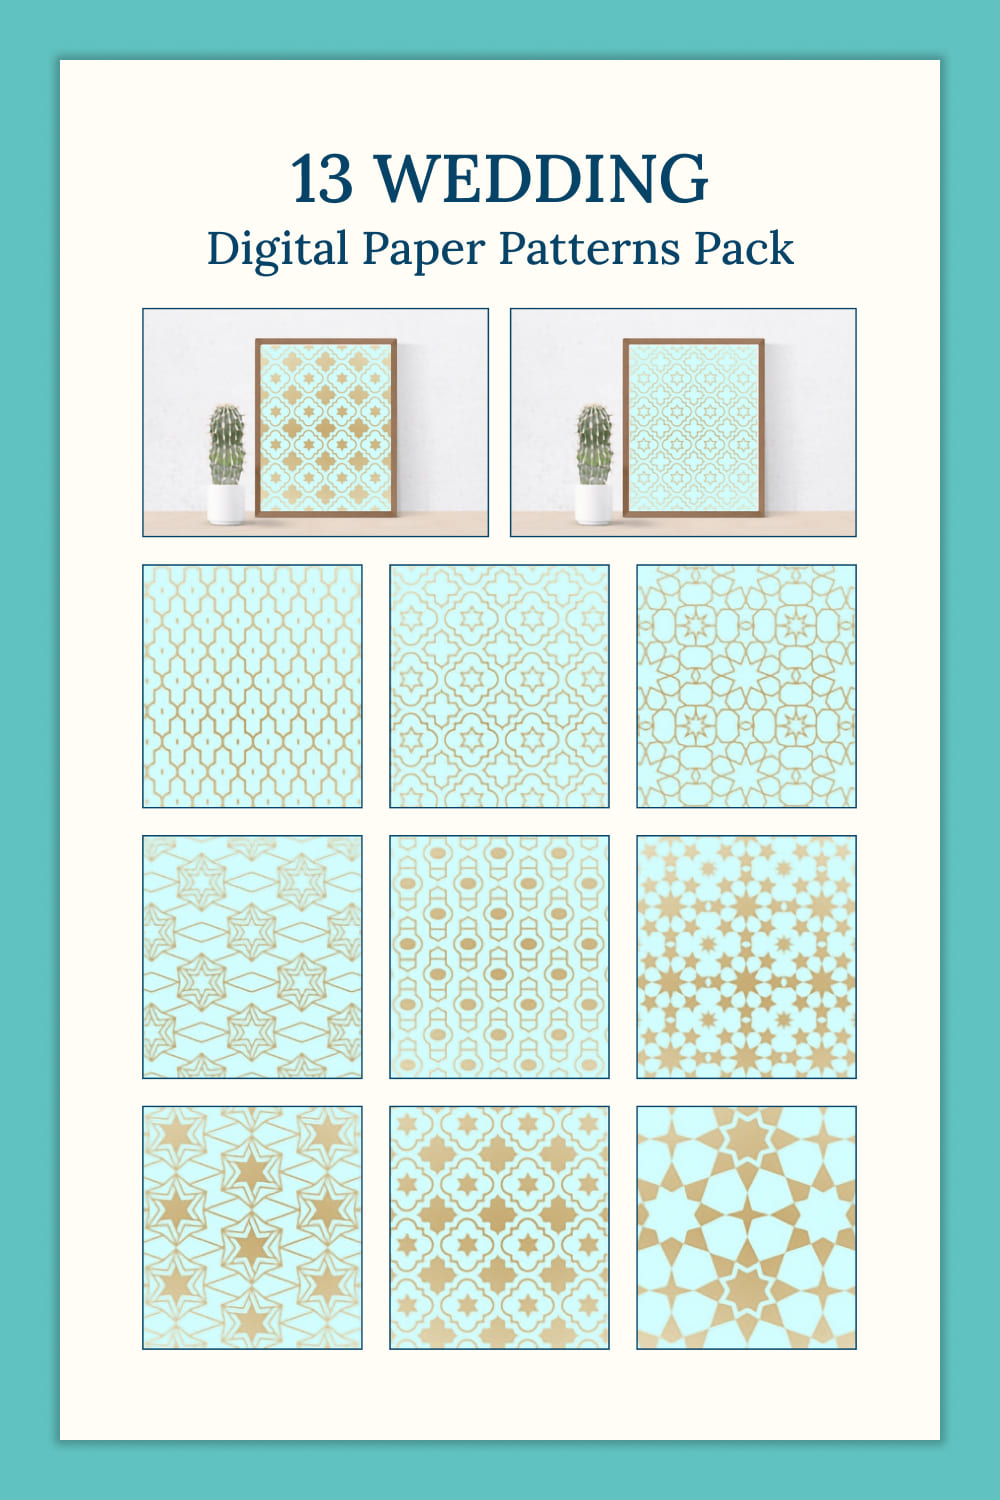 13 patterns in gold and turquoise colors.